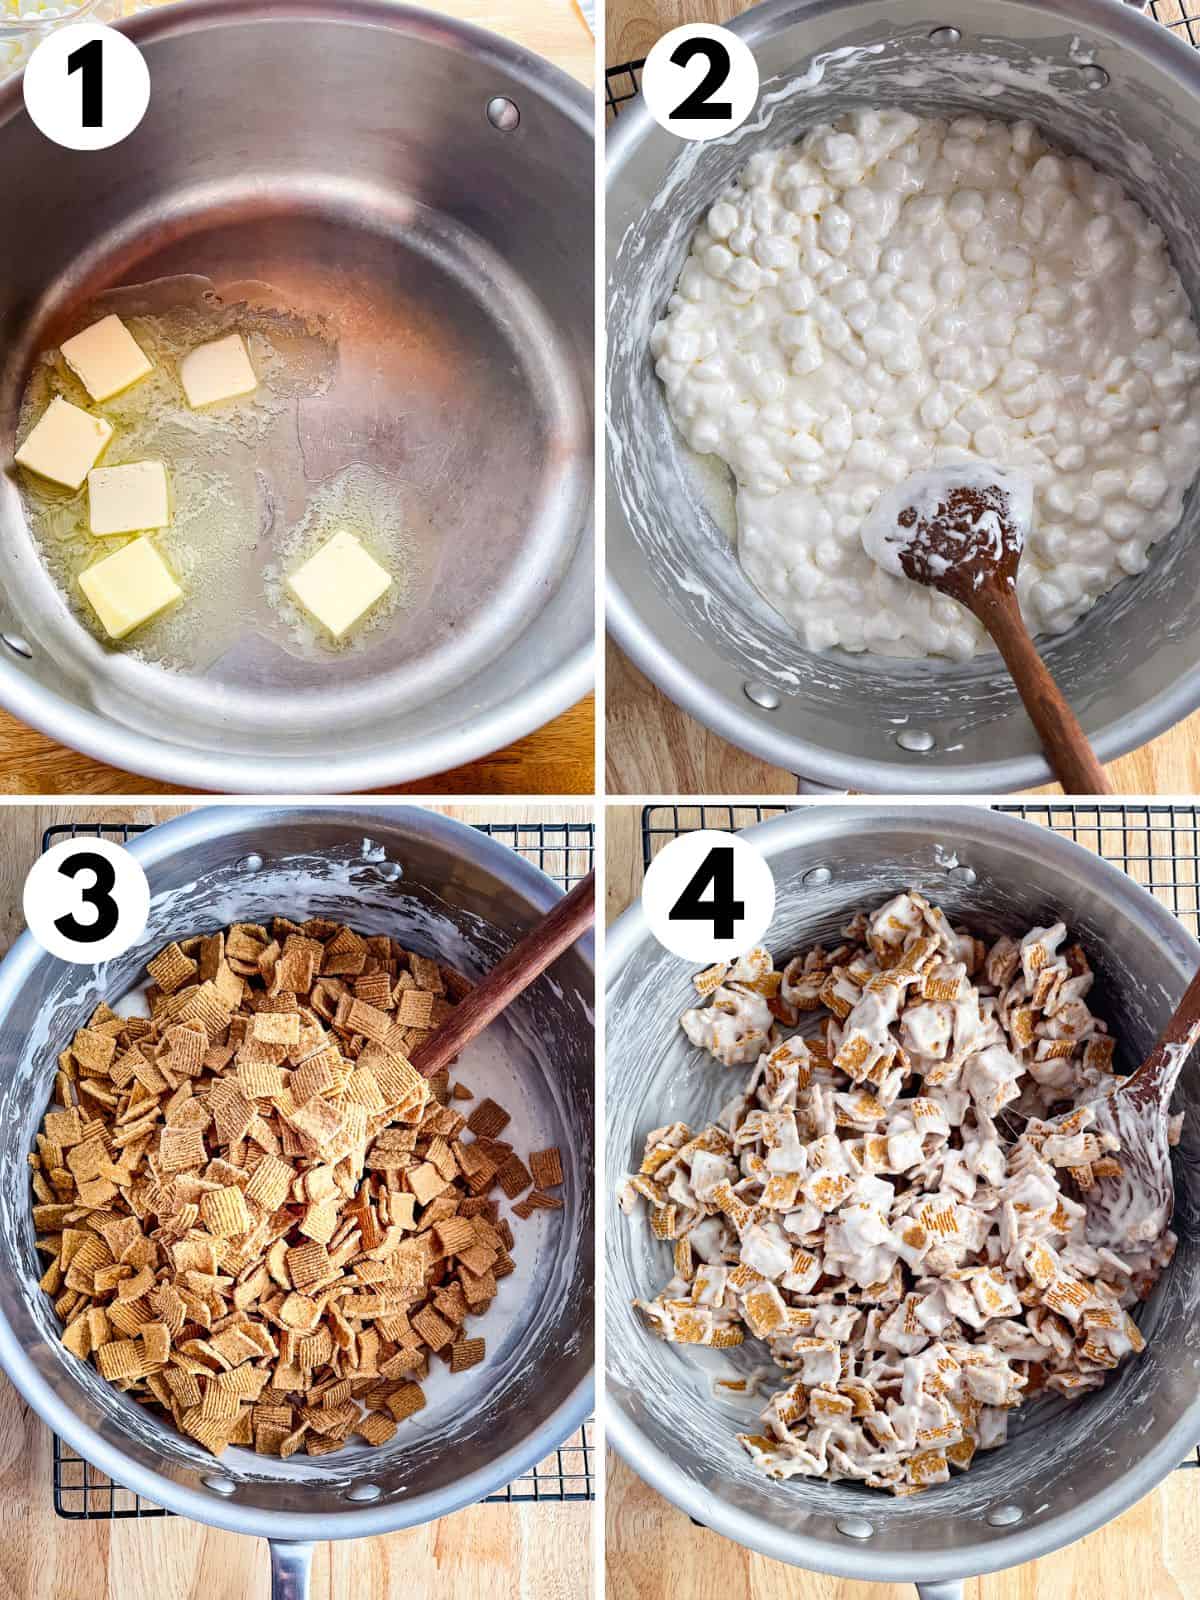 Steps for making golden grahams s'more bars. 1. Melting butter. 2. Melting marshmallows. 3. Adding graham cereal to the pot. 4. Coating the cereal with the melted marshmallows.